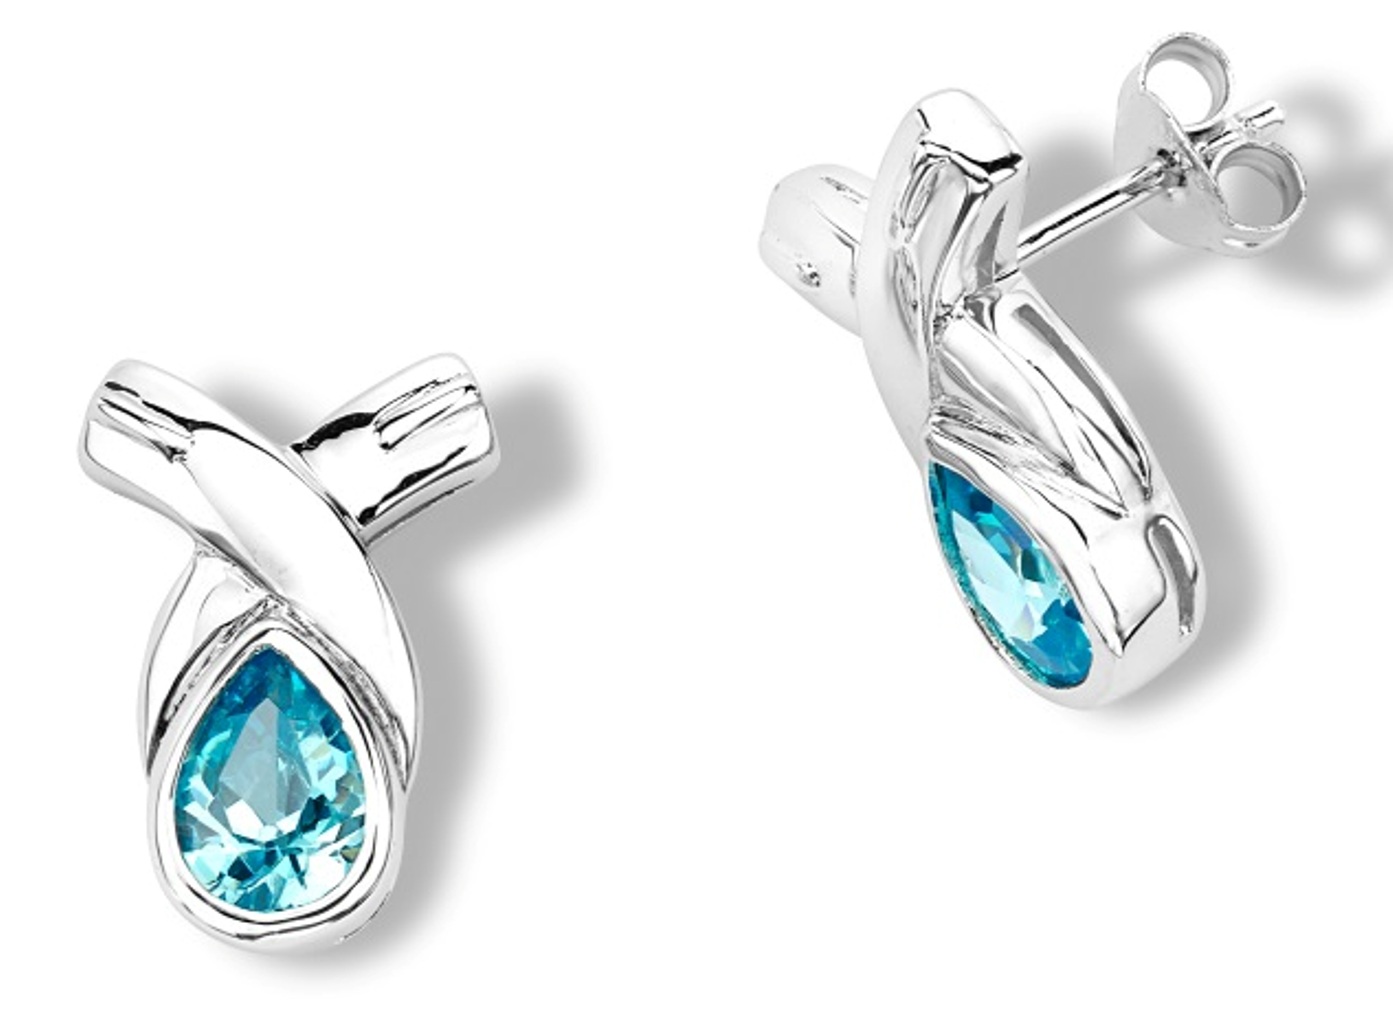 Inlaid Pear Blue Topaz 'X' Post Earrings, Rhodium Plated Sterling Silver